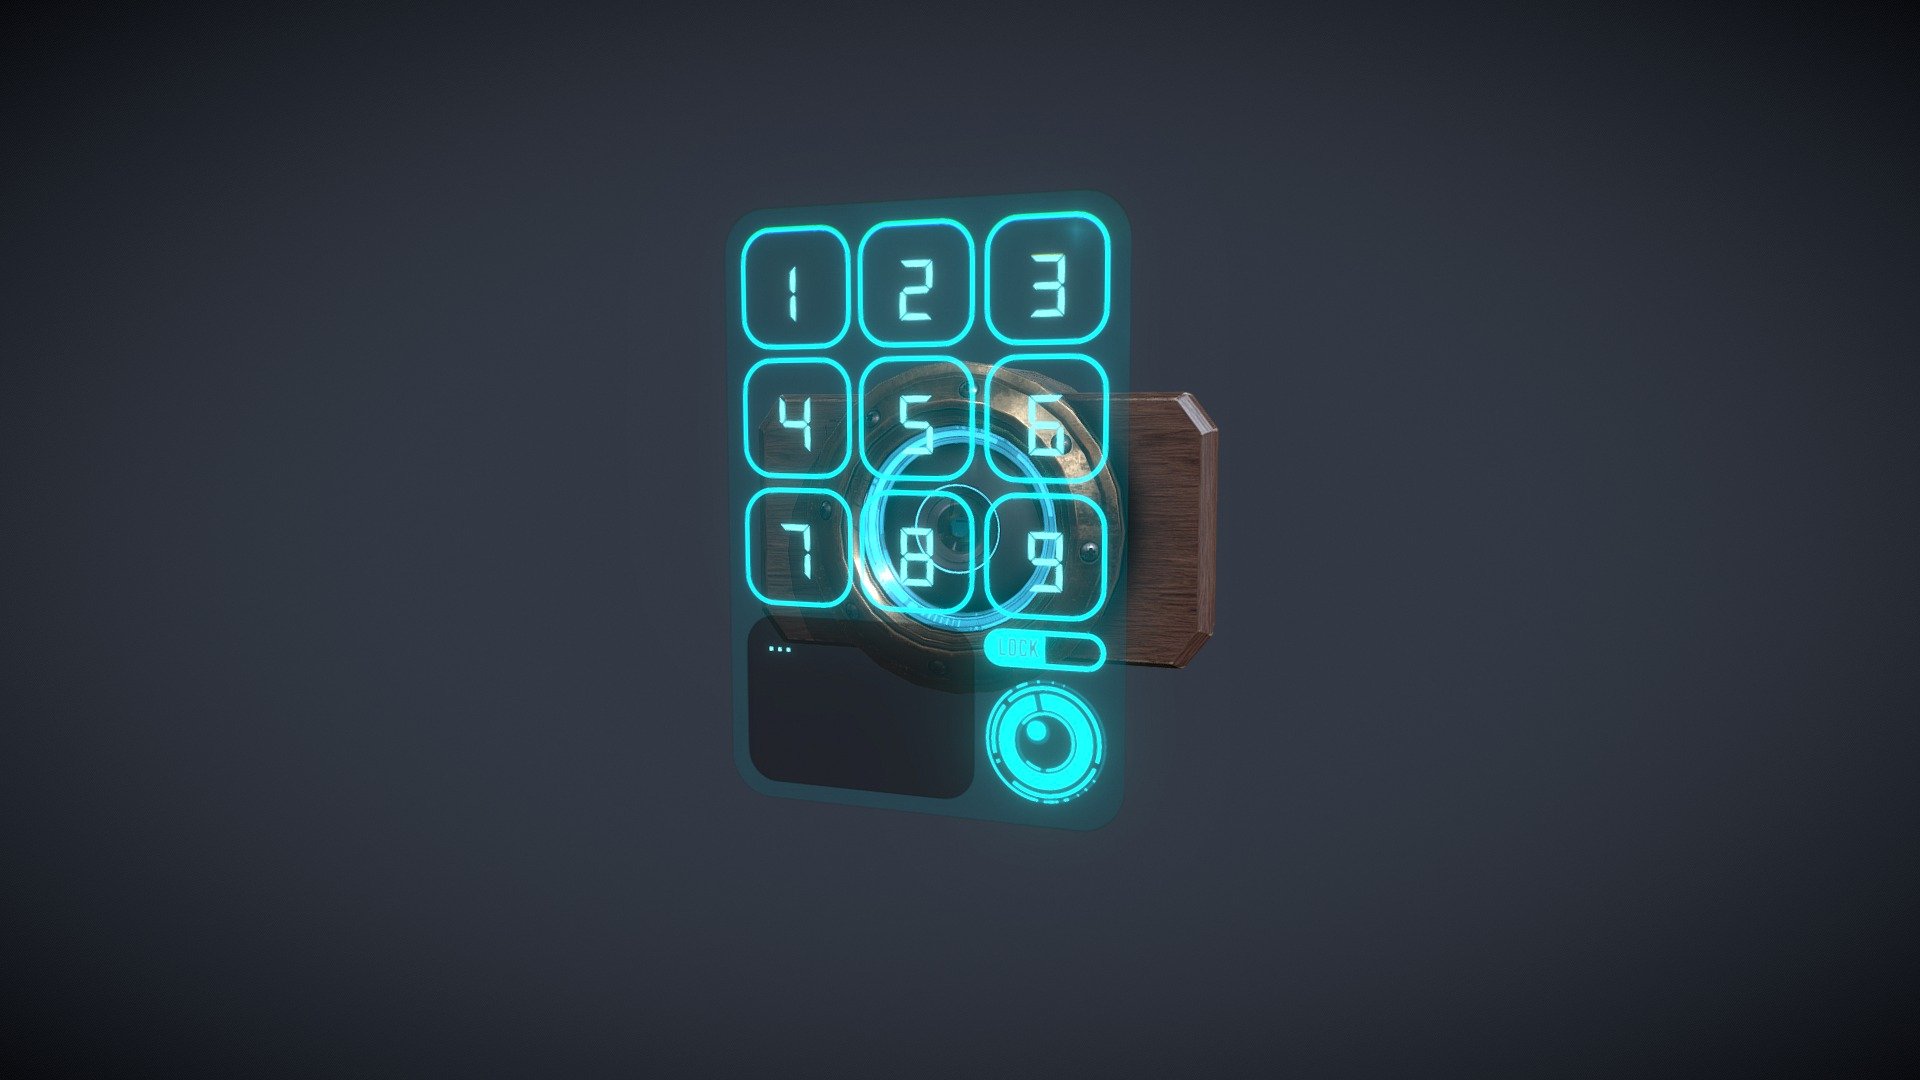 Hi All :) Just a small Victorian / retro futuristic door lock :) You d better have the code !

Made with Maya, PS and Substance.

You will find in the package Scene file, FBX and 2k Textures.
If you have any customs need, please feel free to contact me 3d model